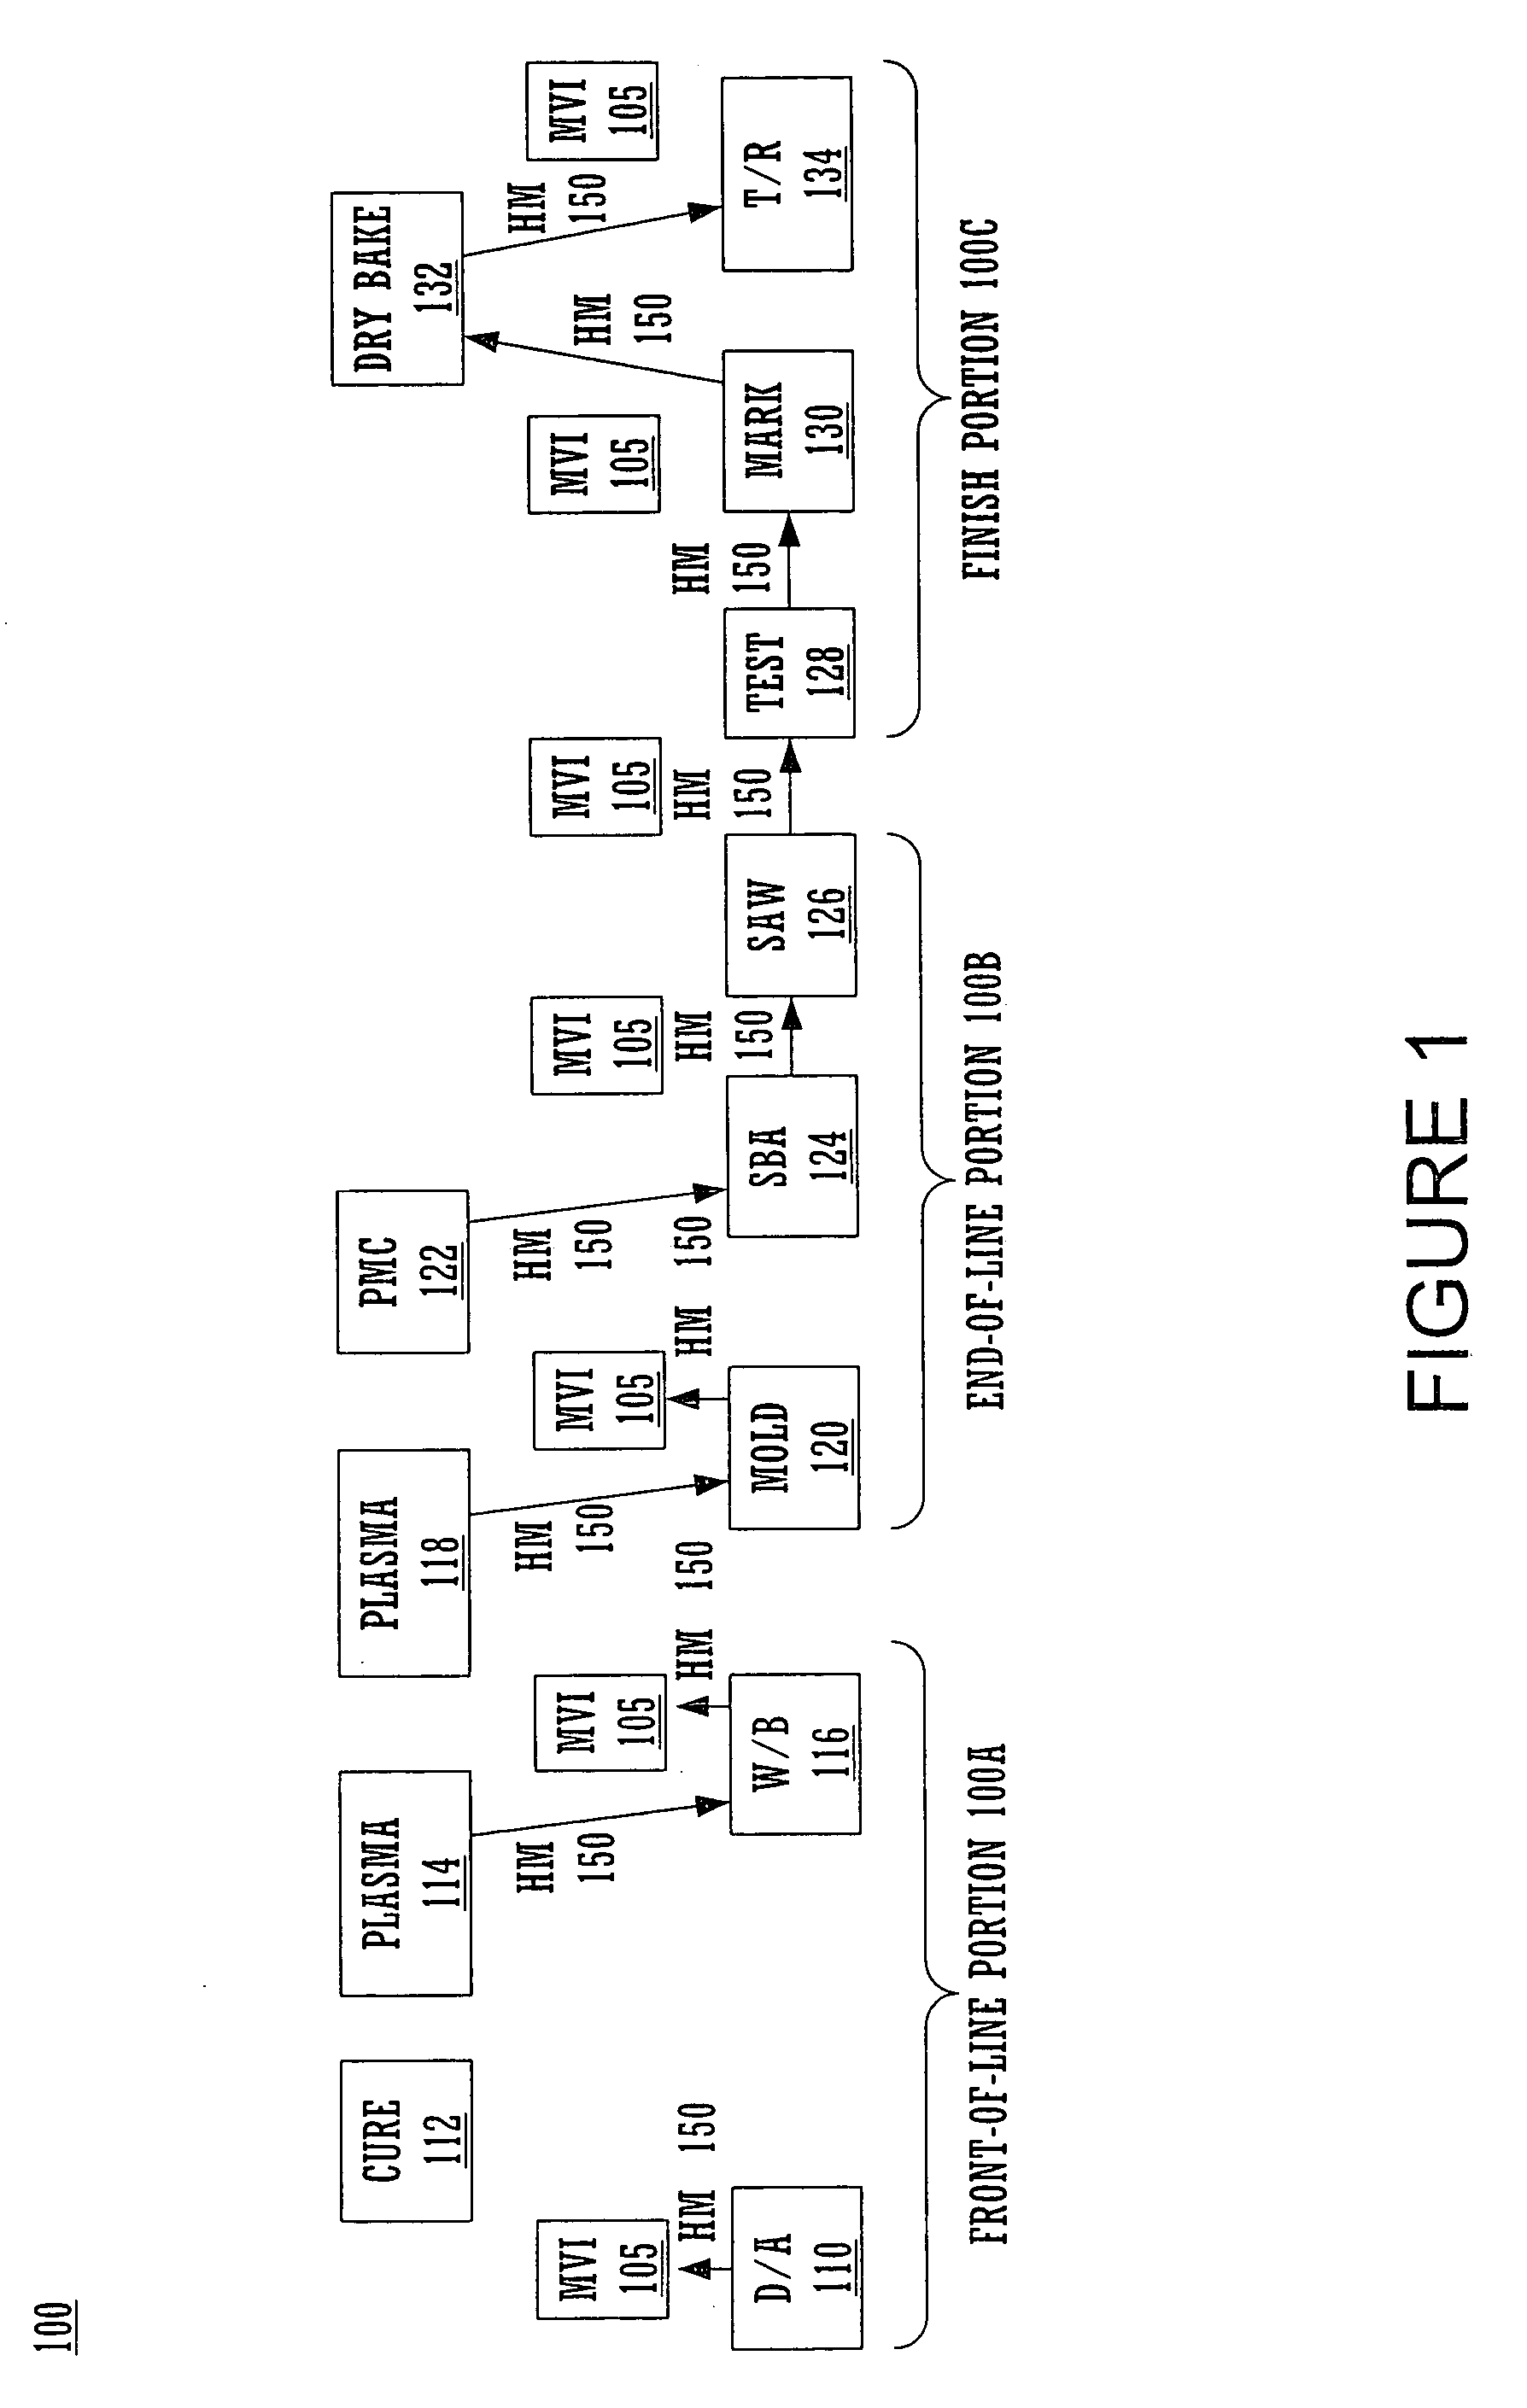 Method and system for universal packaging in conjunction with a back-end integrated circuit manufacturing process